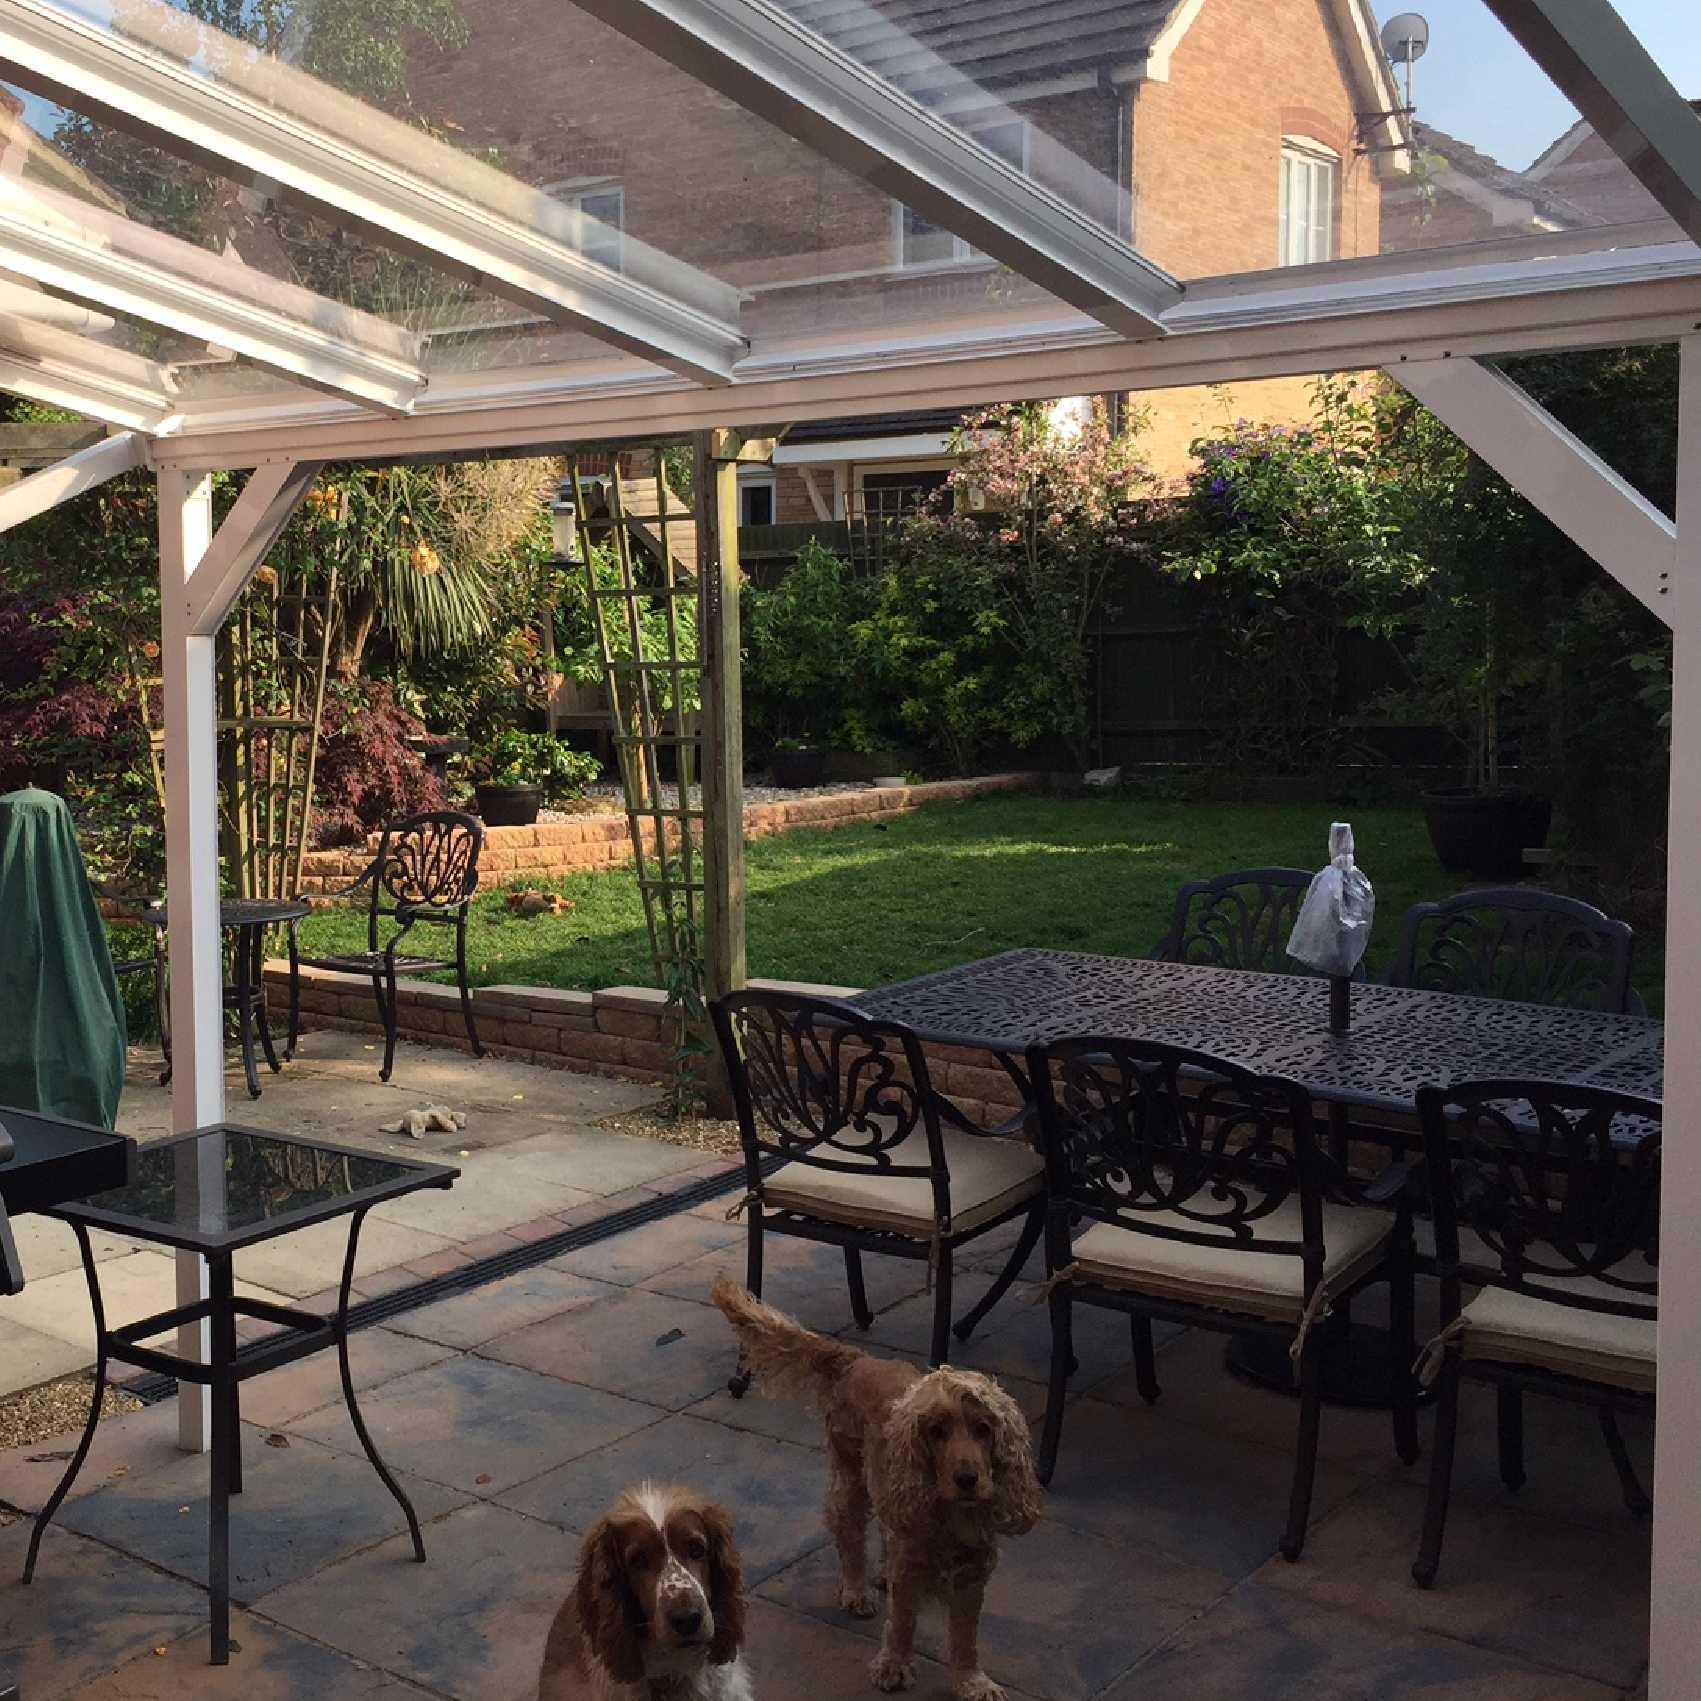 Affordable Omega Smart Lean-To Canopy, White UNGLAZED for 6mm Glazing - 7.7m (W) x 2.5m (P), (4) Supporting Posts